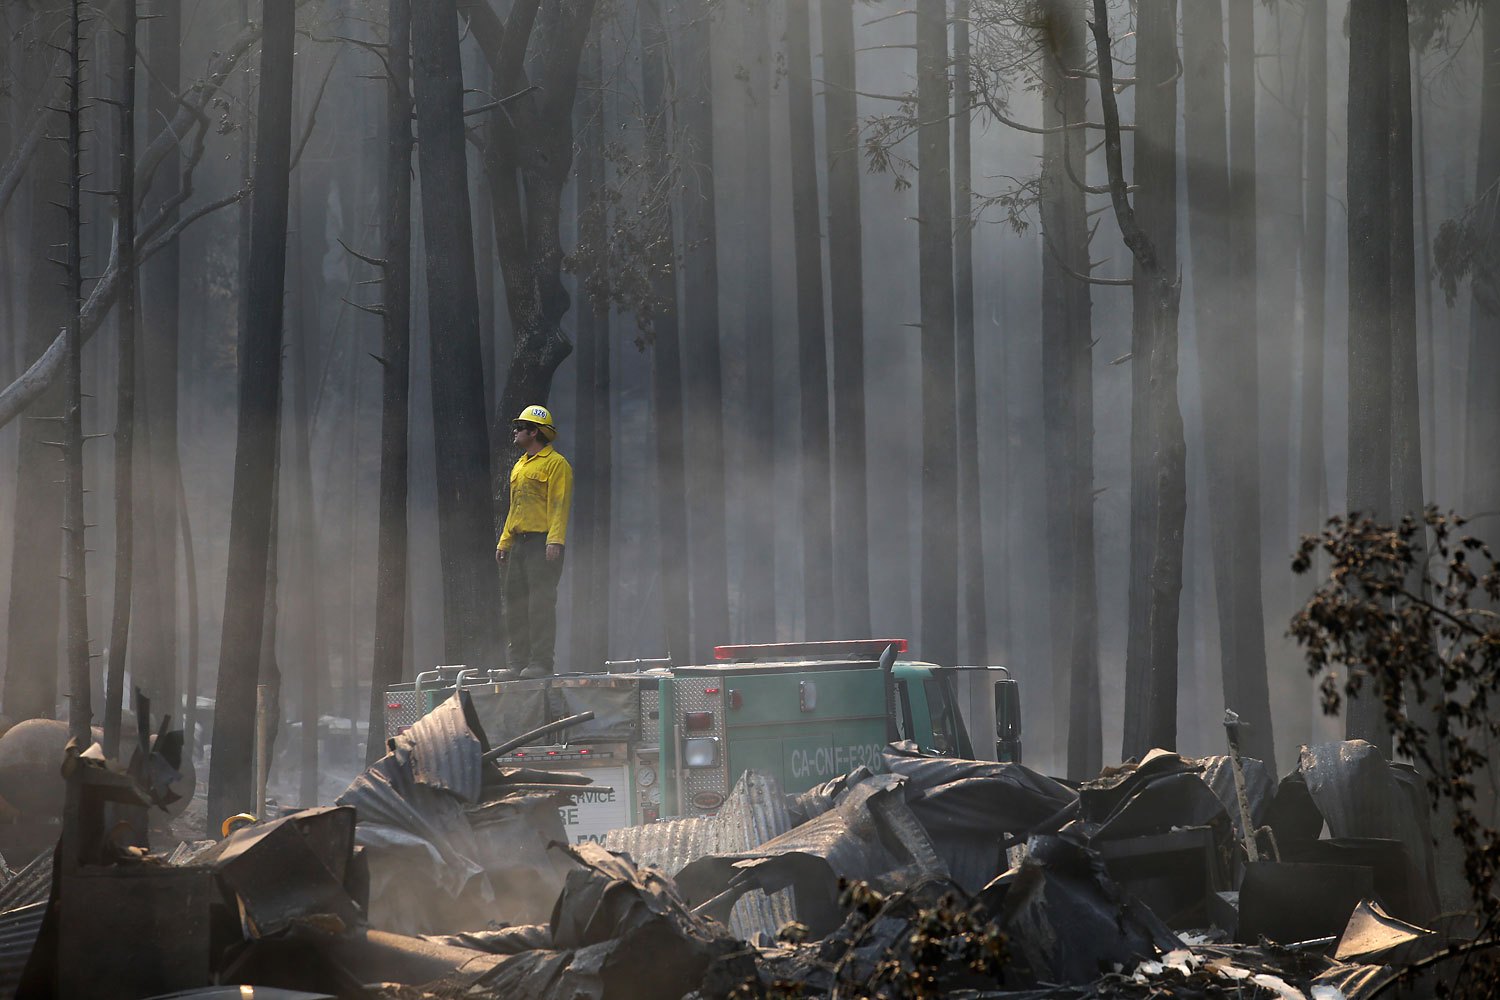 A firefighter stands on top of a fire truck at a campground destroyed by the Rim Fire near Yosemite National Park, Calif., Aug. 26, 2013. The fire burned nearly 371 square miles and was one of the largest-ever in the state.